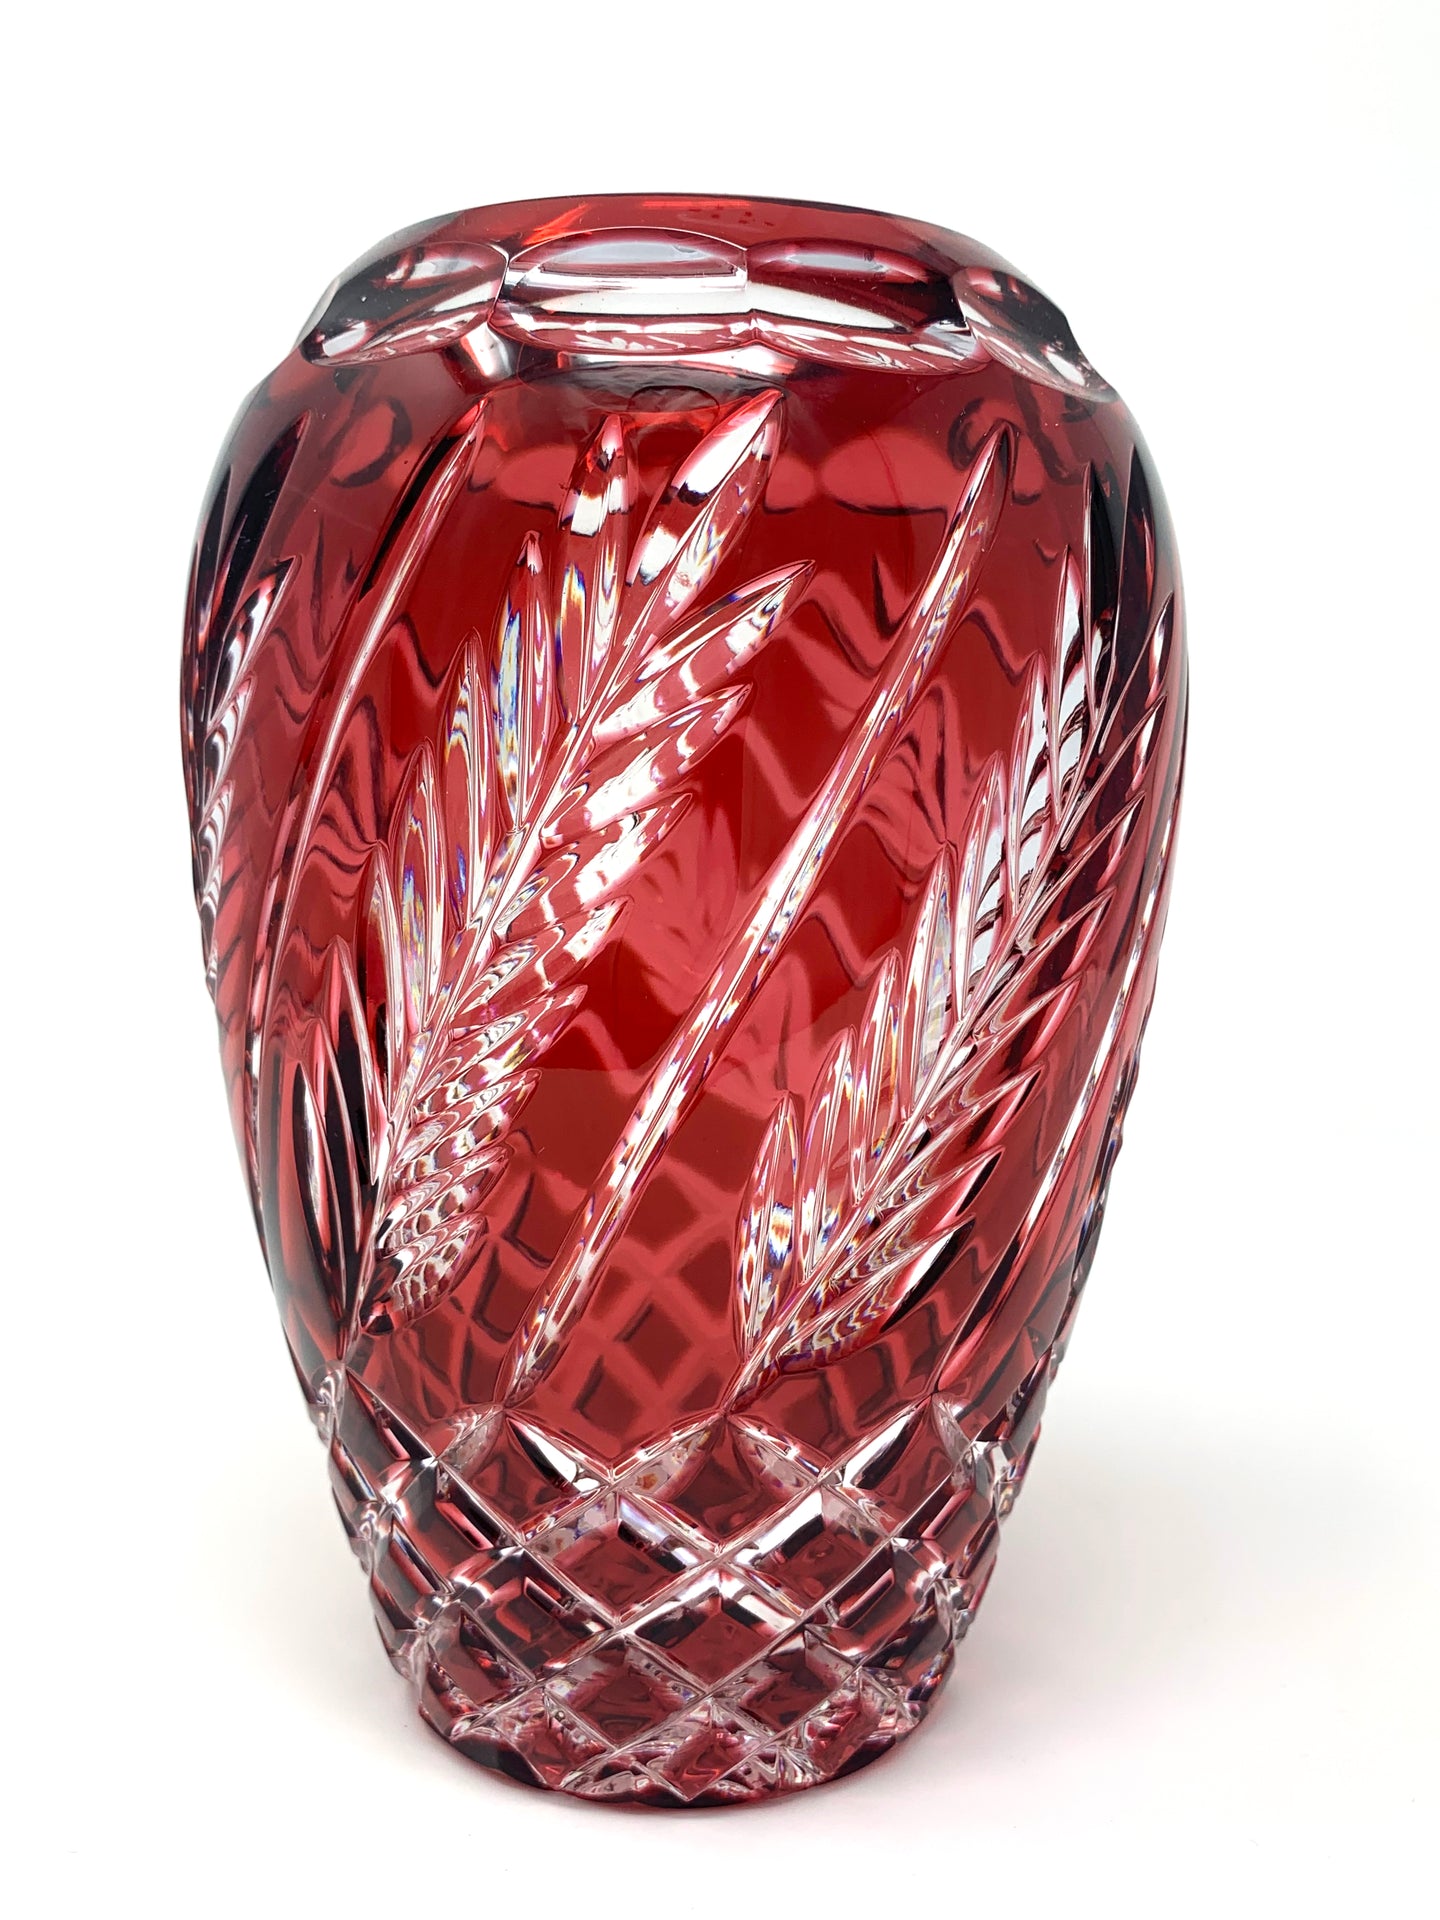 Red Wheat Pear-shaped Vase